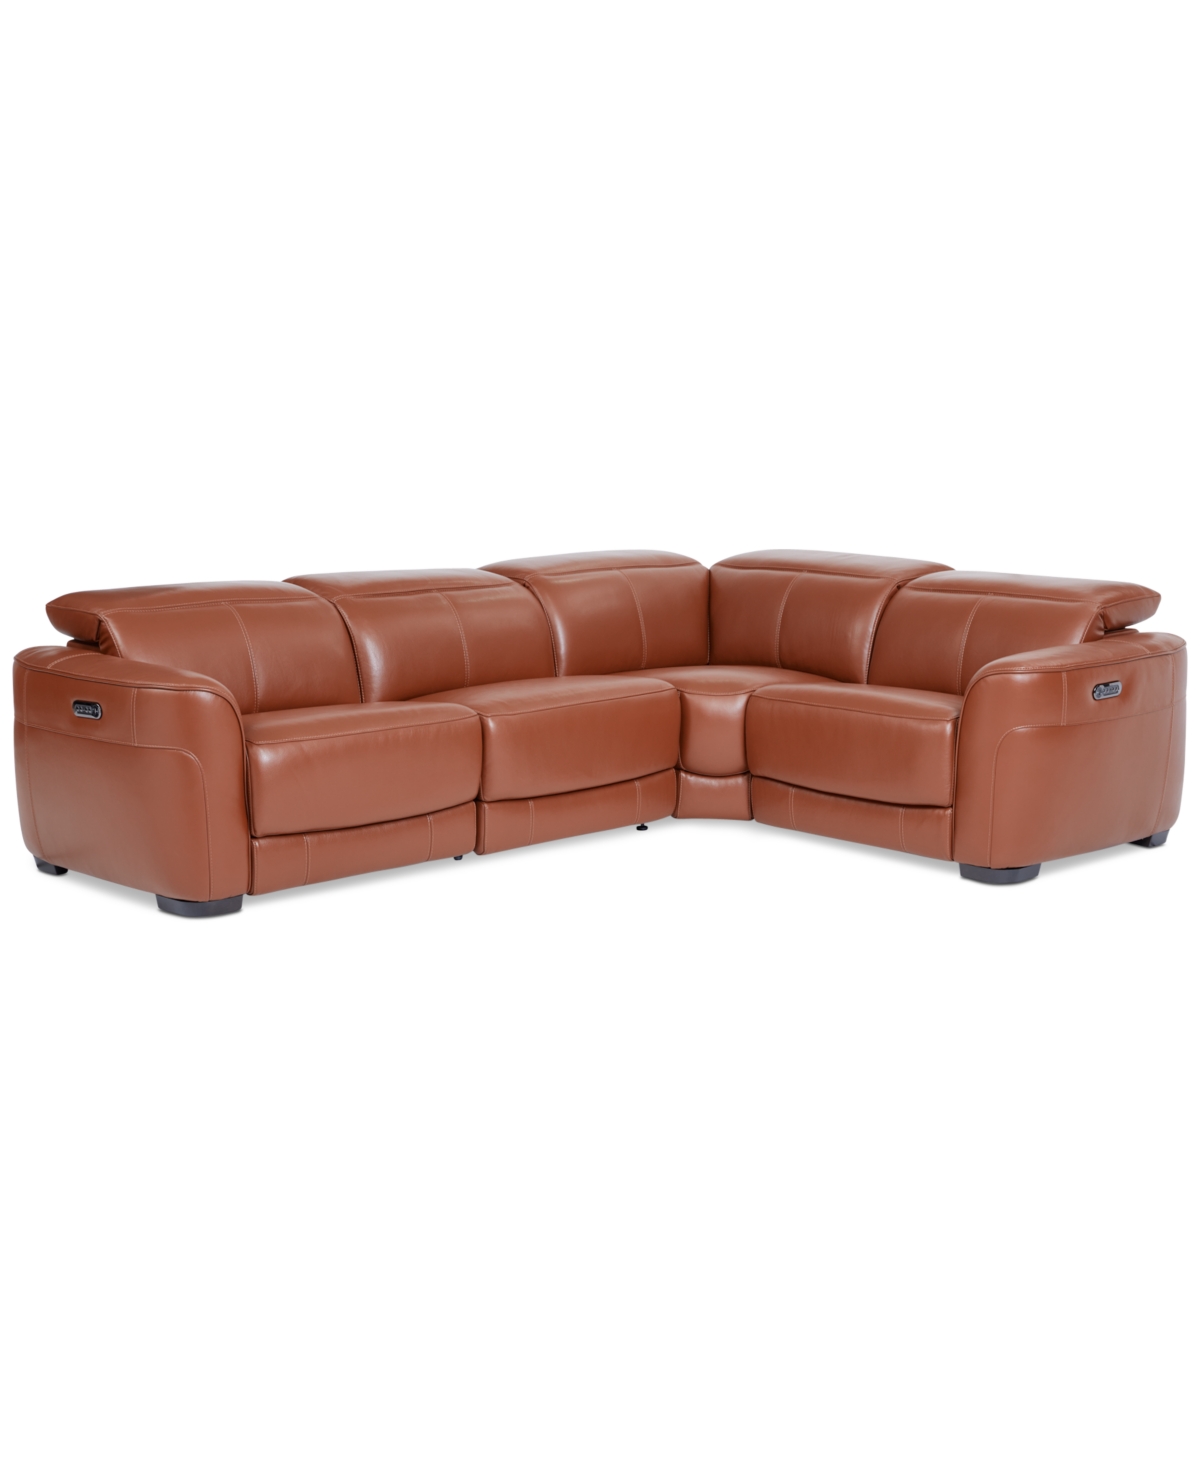 Lexanna 4-Pc. Leather Sectional with 2 Power Motion Recliners, Created for Macys